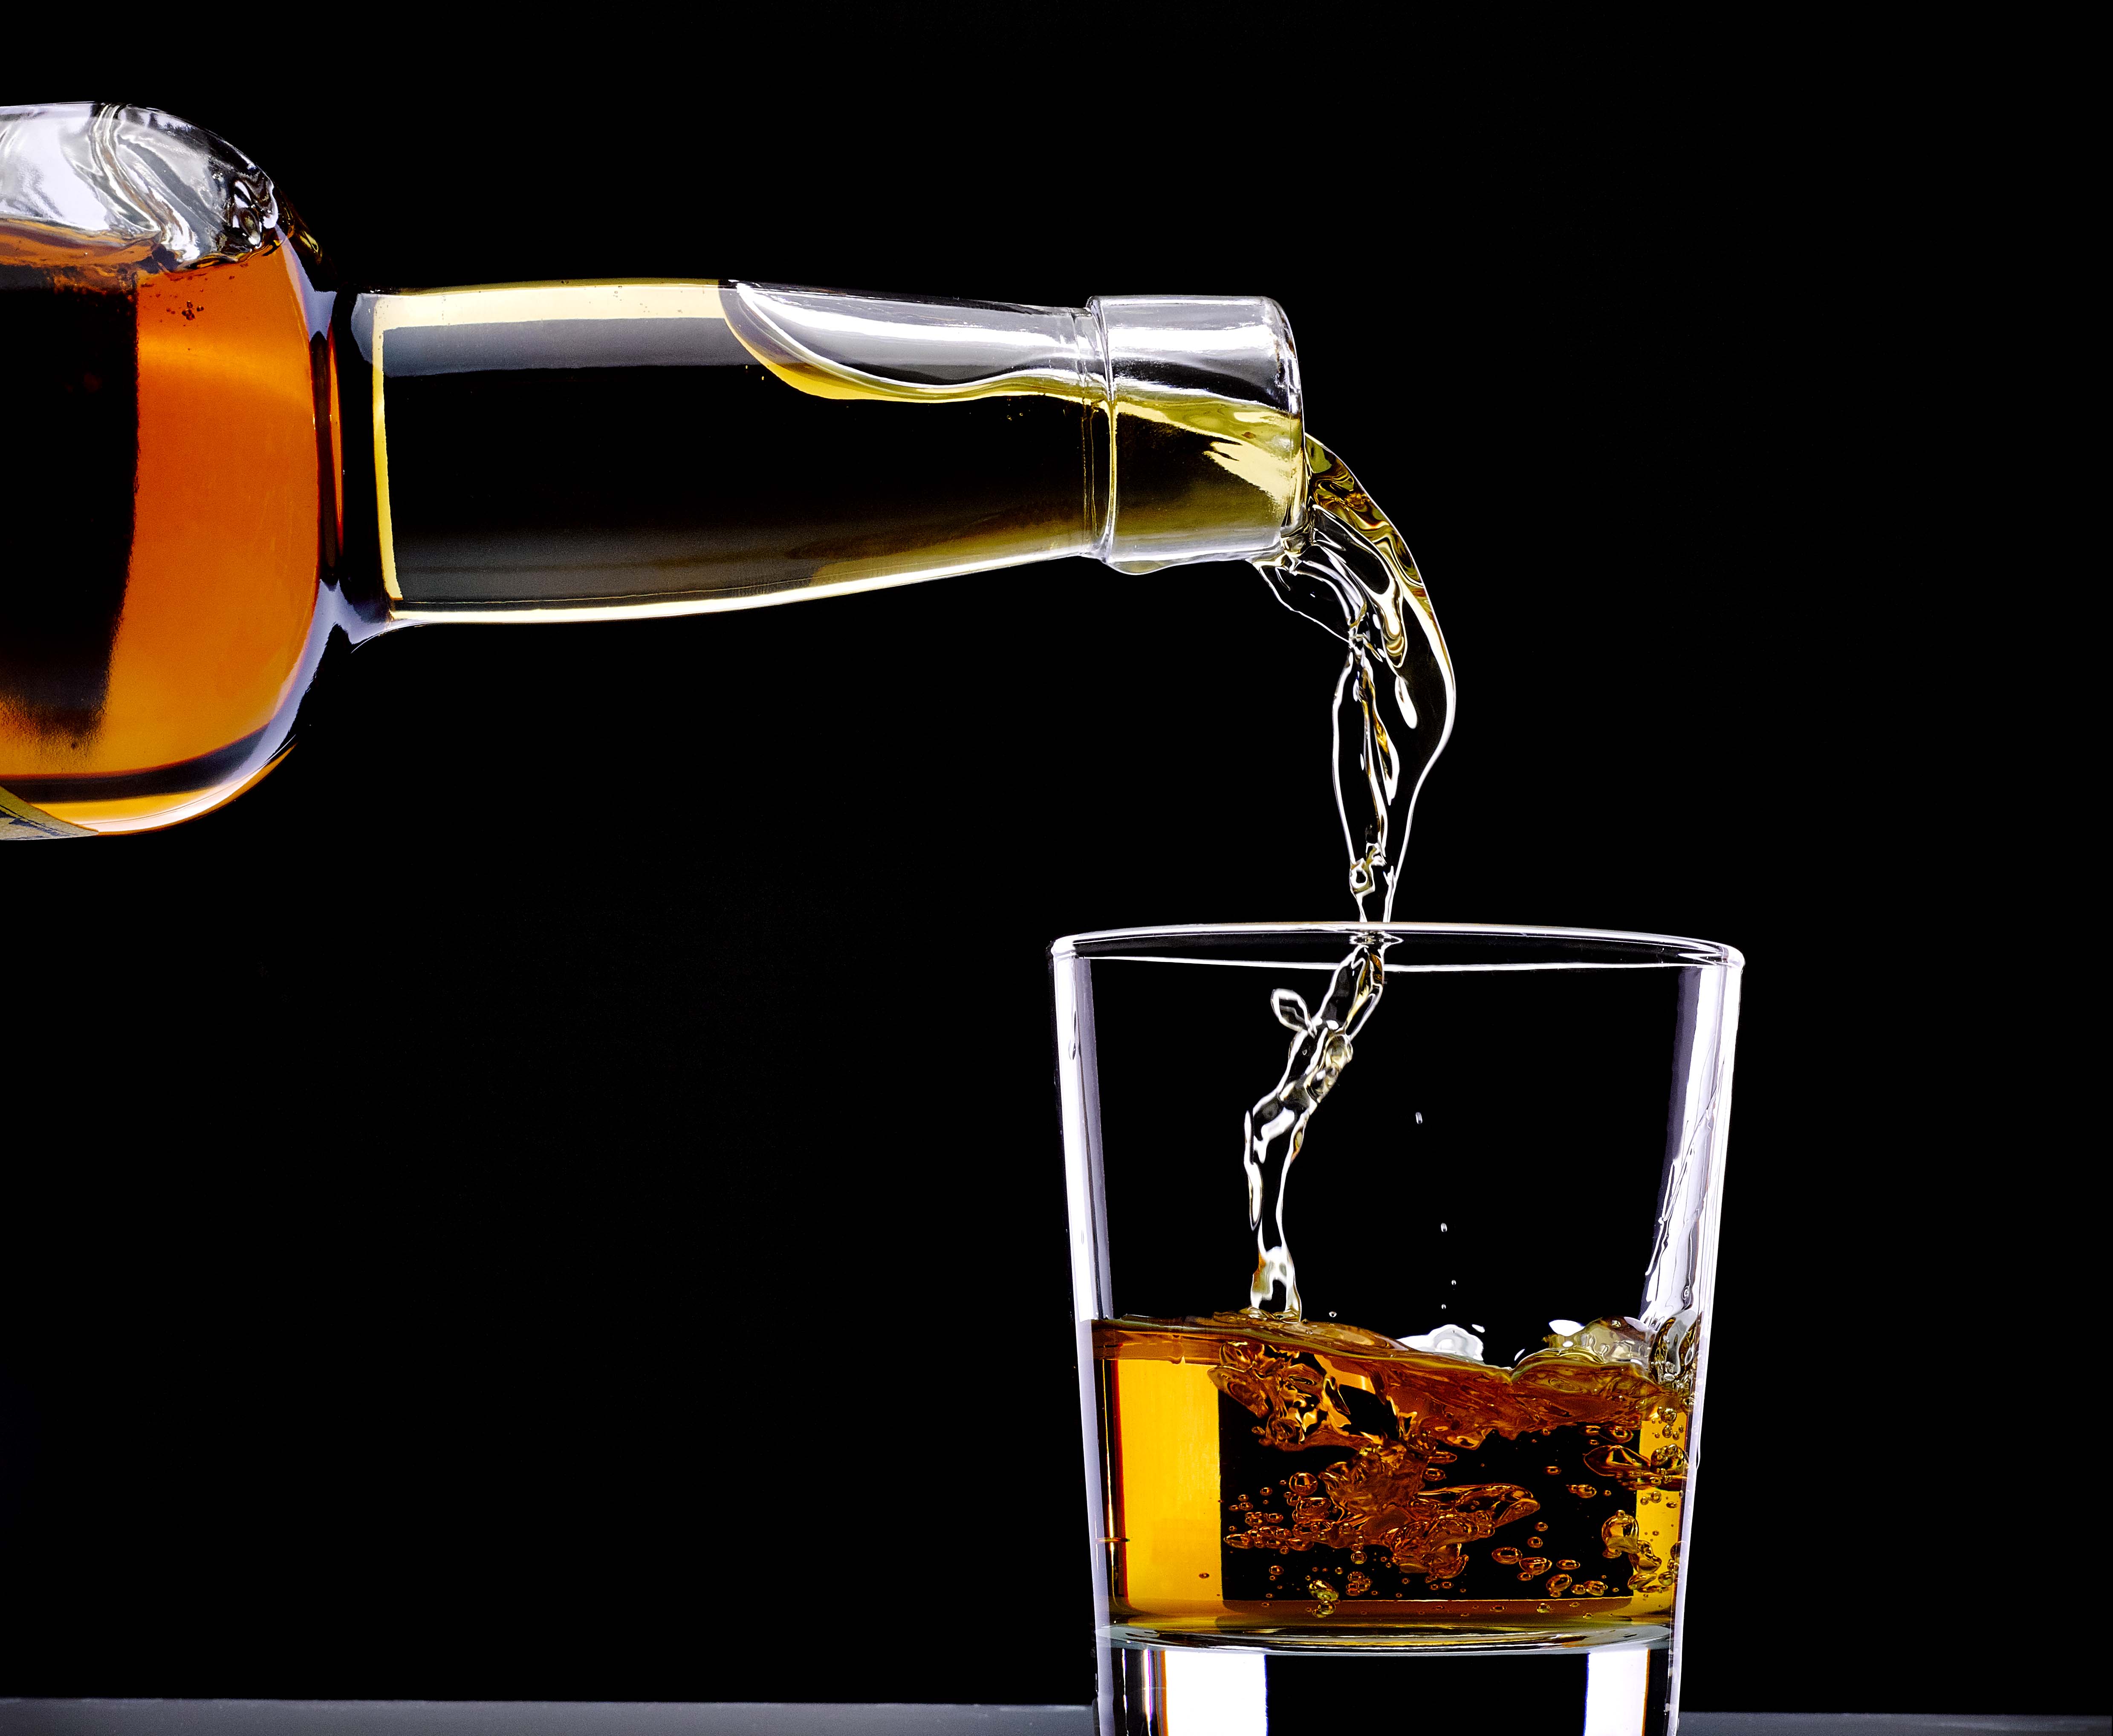 Whiskey being poured into a glass closeup on a black background